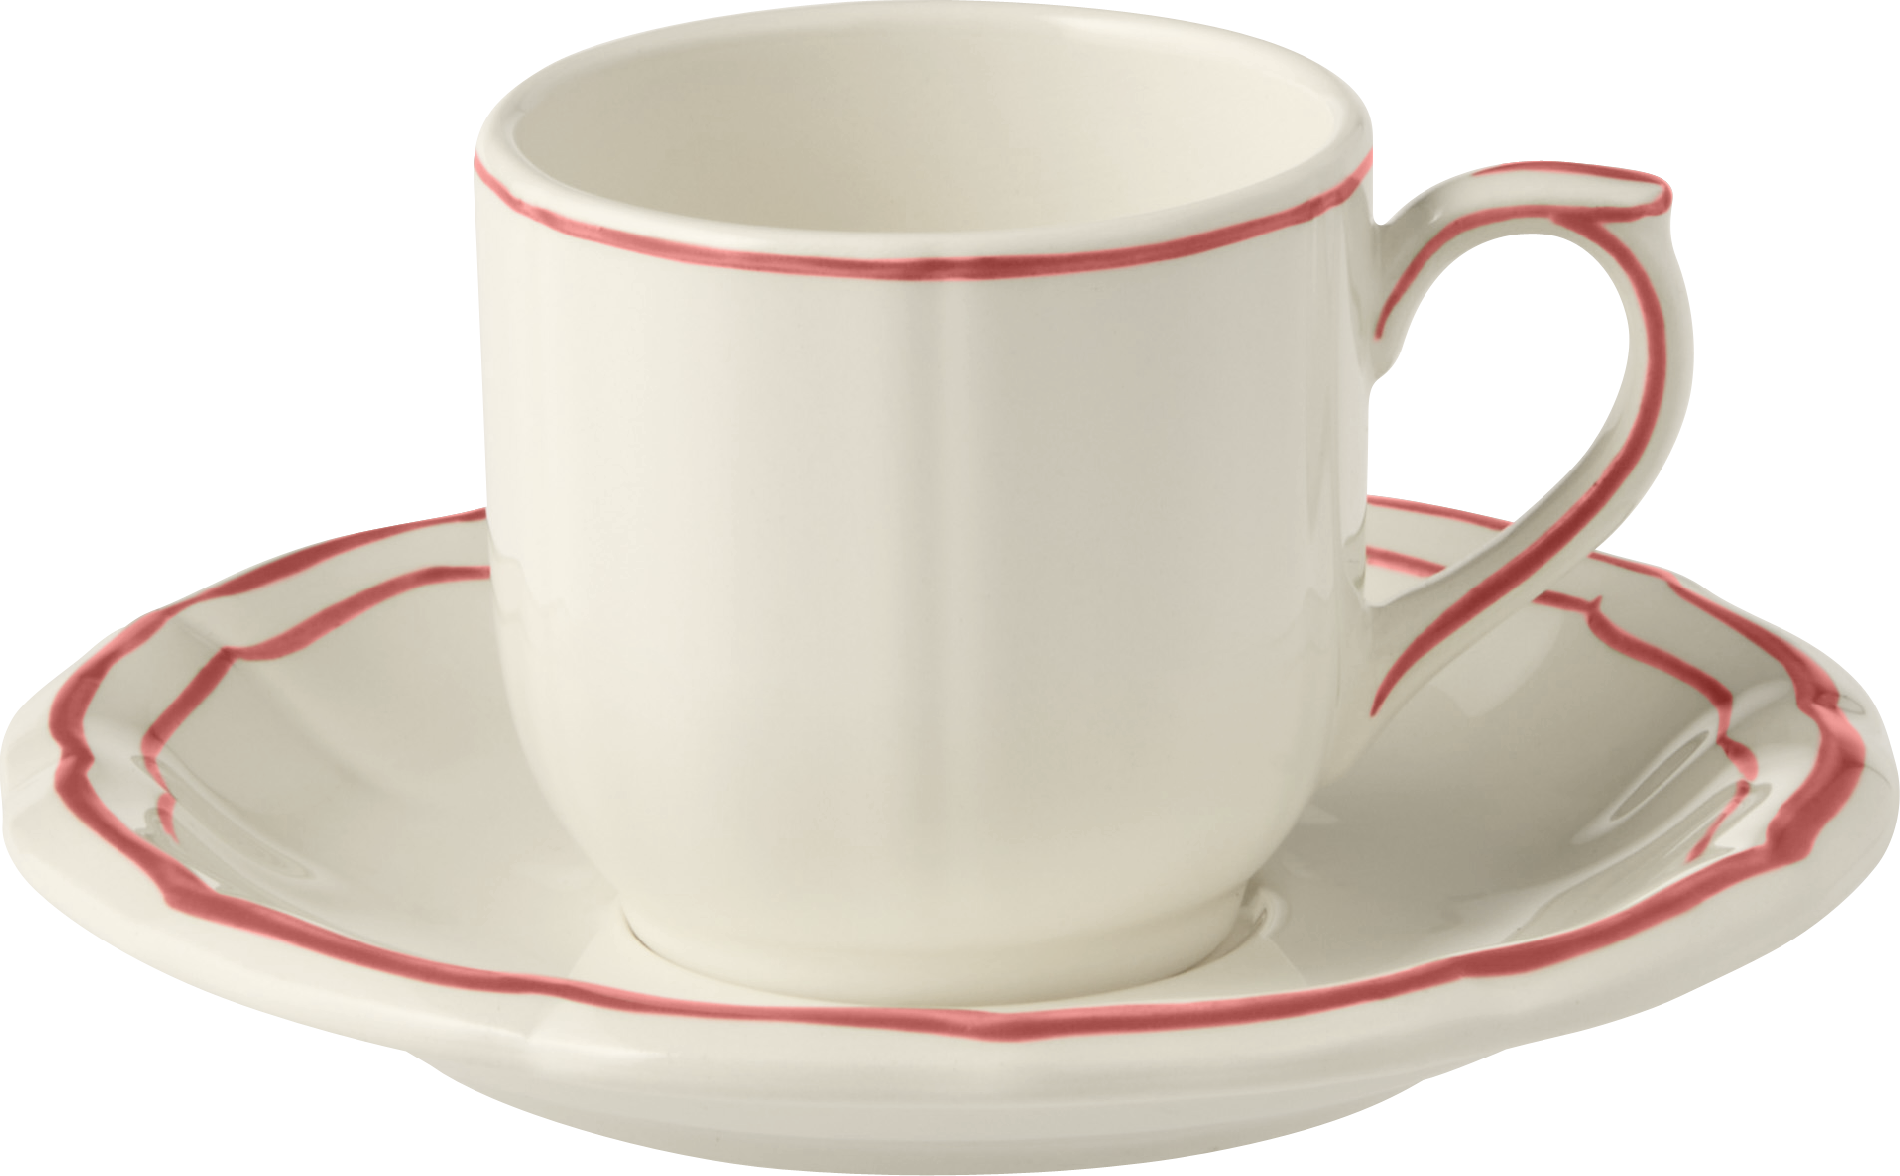 After Dinner Cup & Saucer , Filet Corail